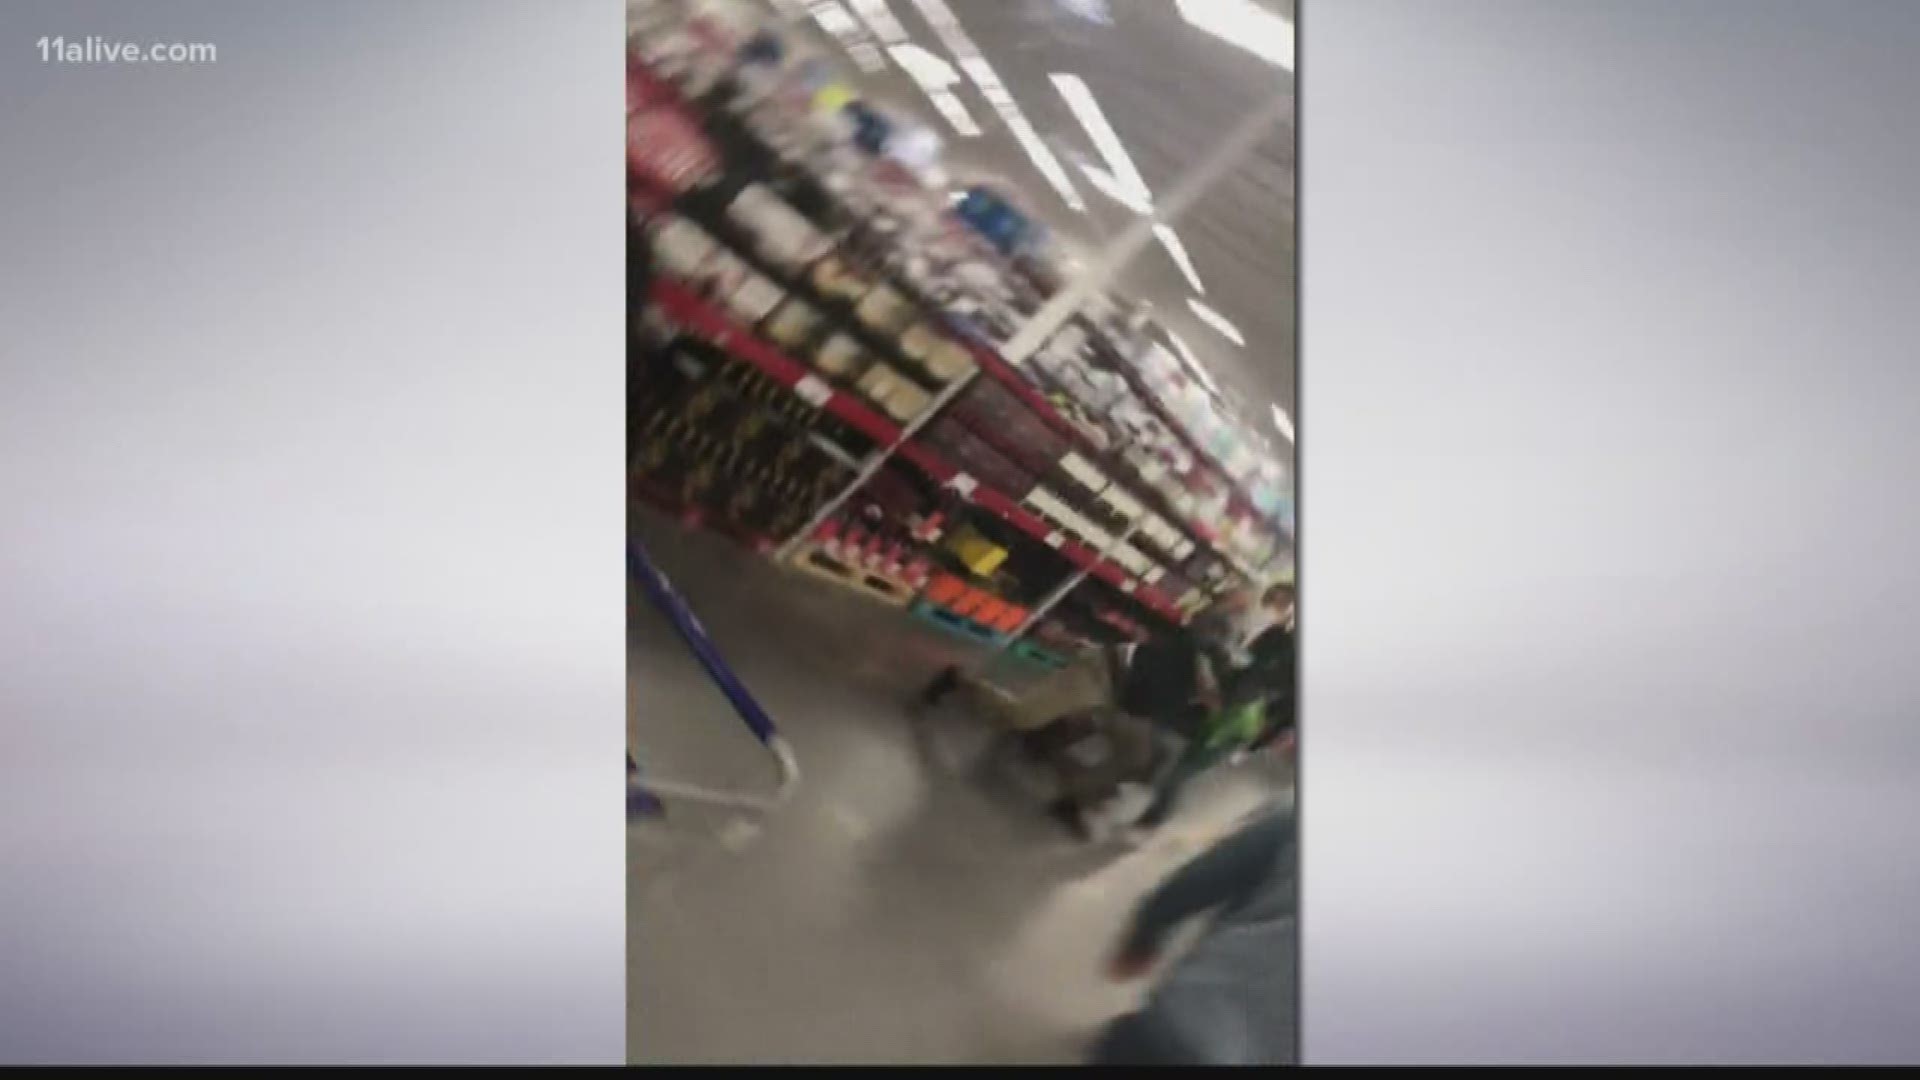 A shopper had to be taken out of a busy Sam's Club on a stretcher after a fight broke out on Thursday in Hiram.